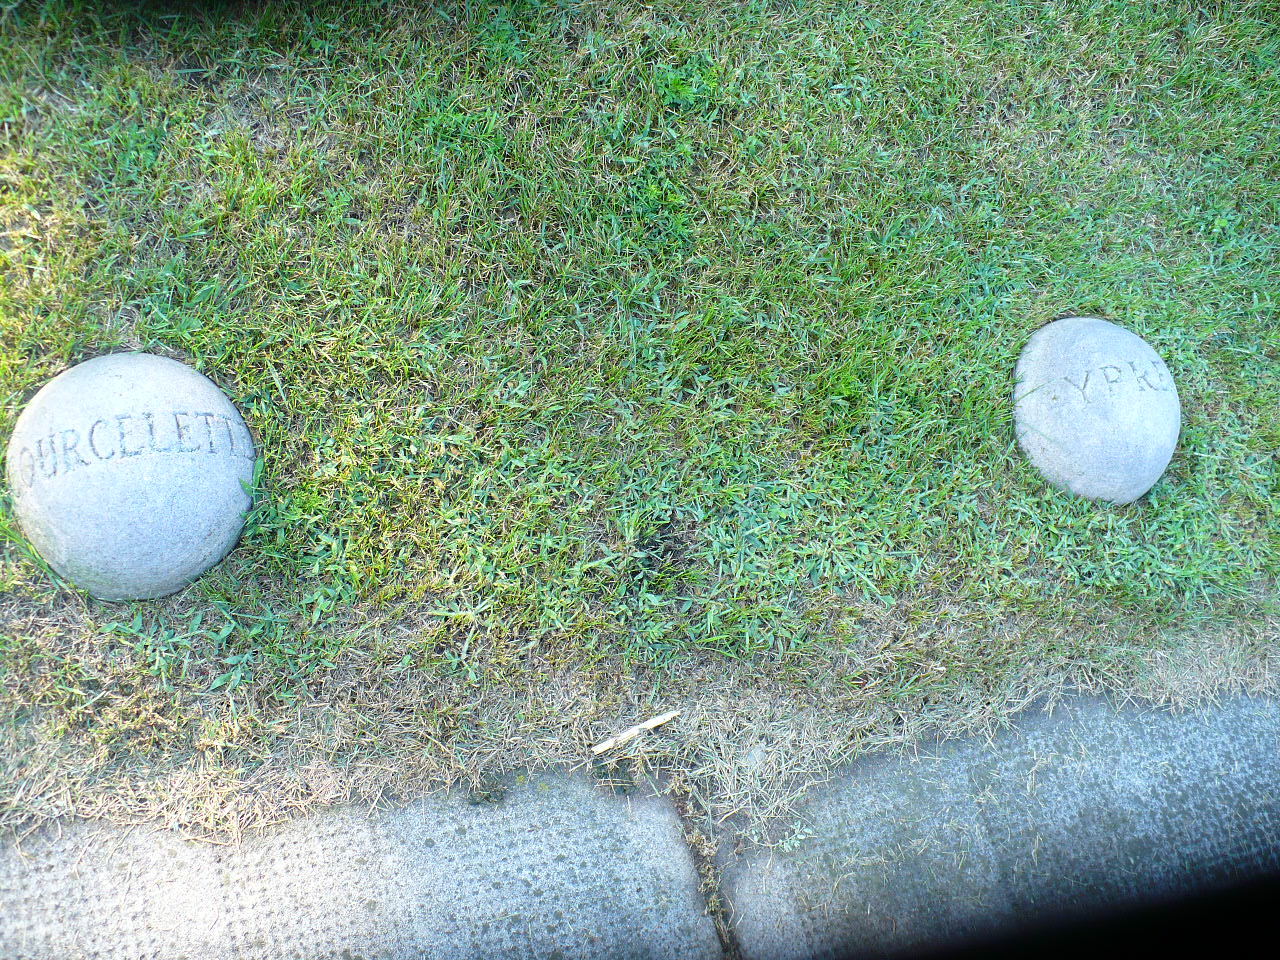 Concrete balls engraved with Courcellette and Ypres.